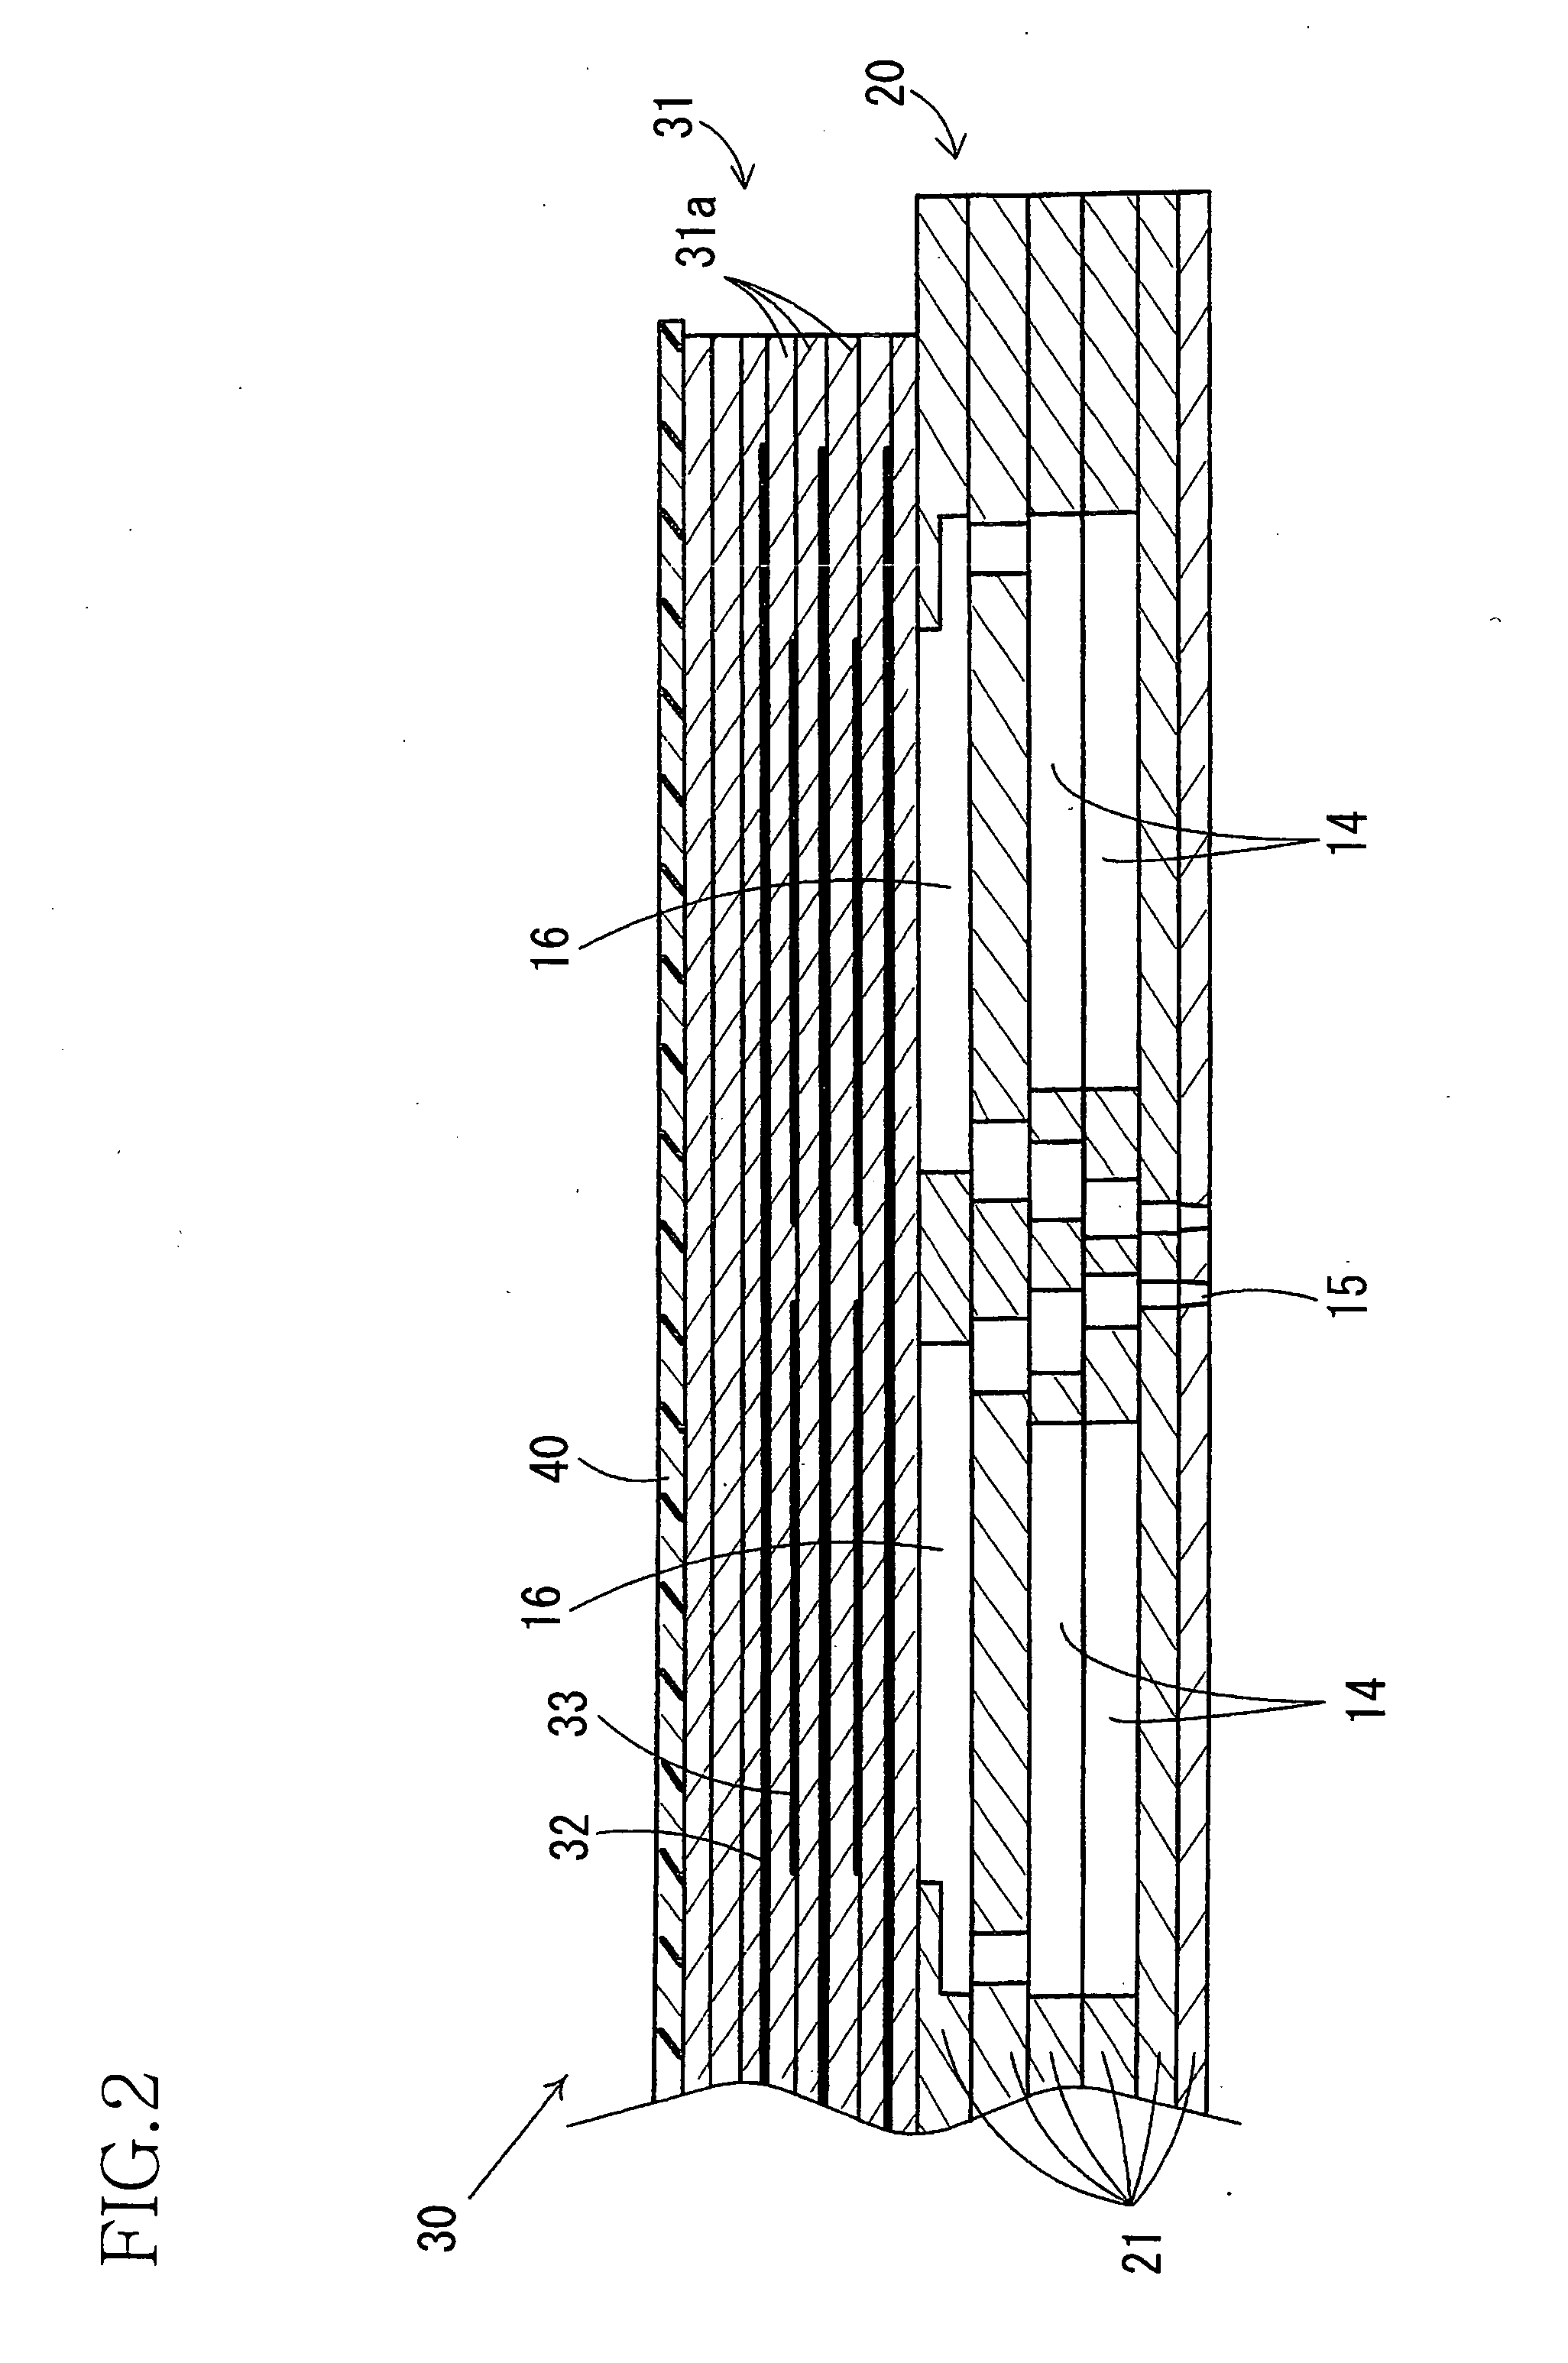 Droplet ejection apparatus